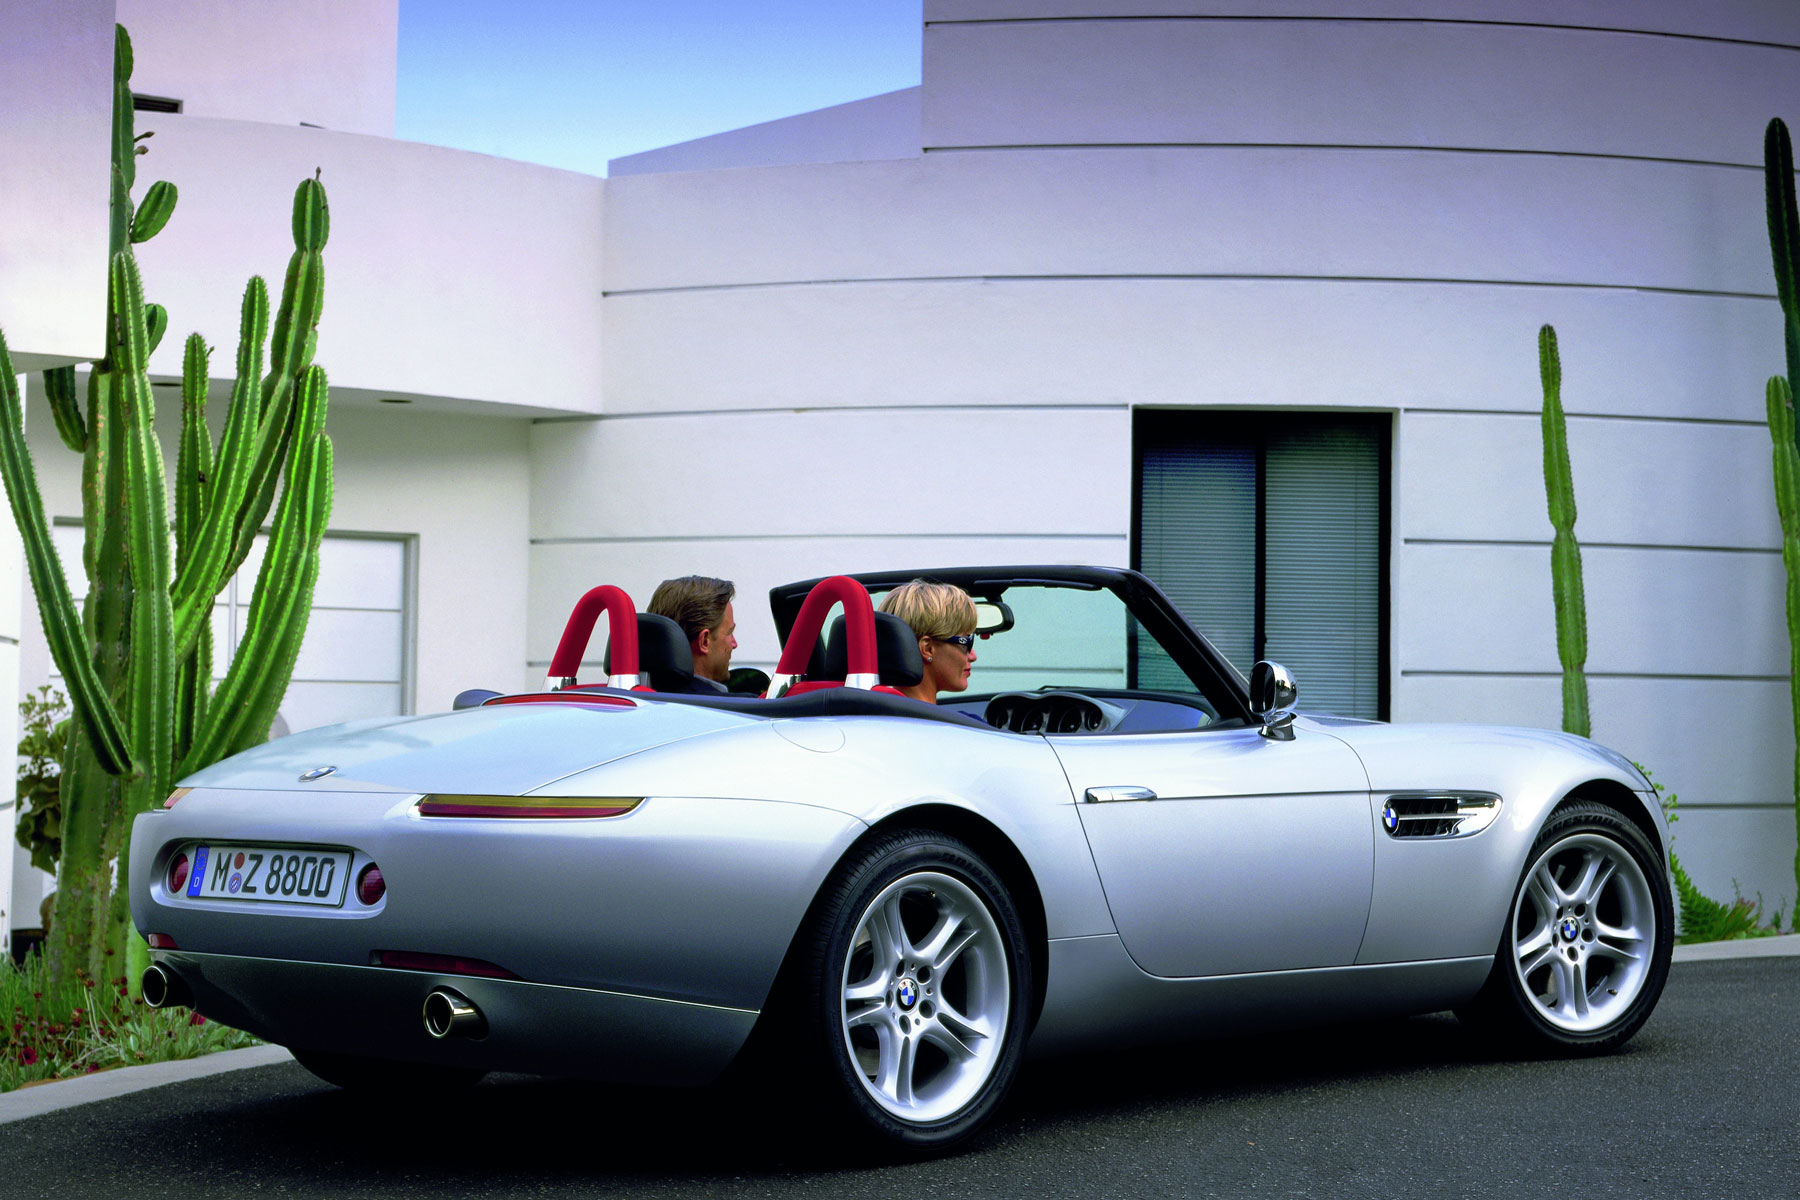 History of the BMW Z cars